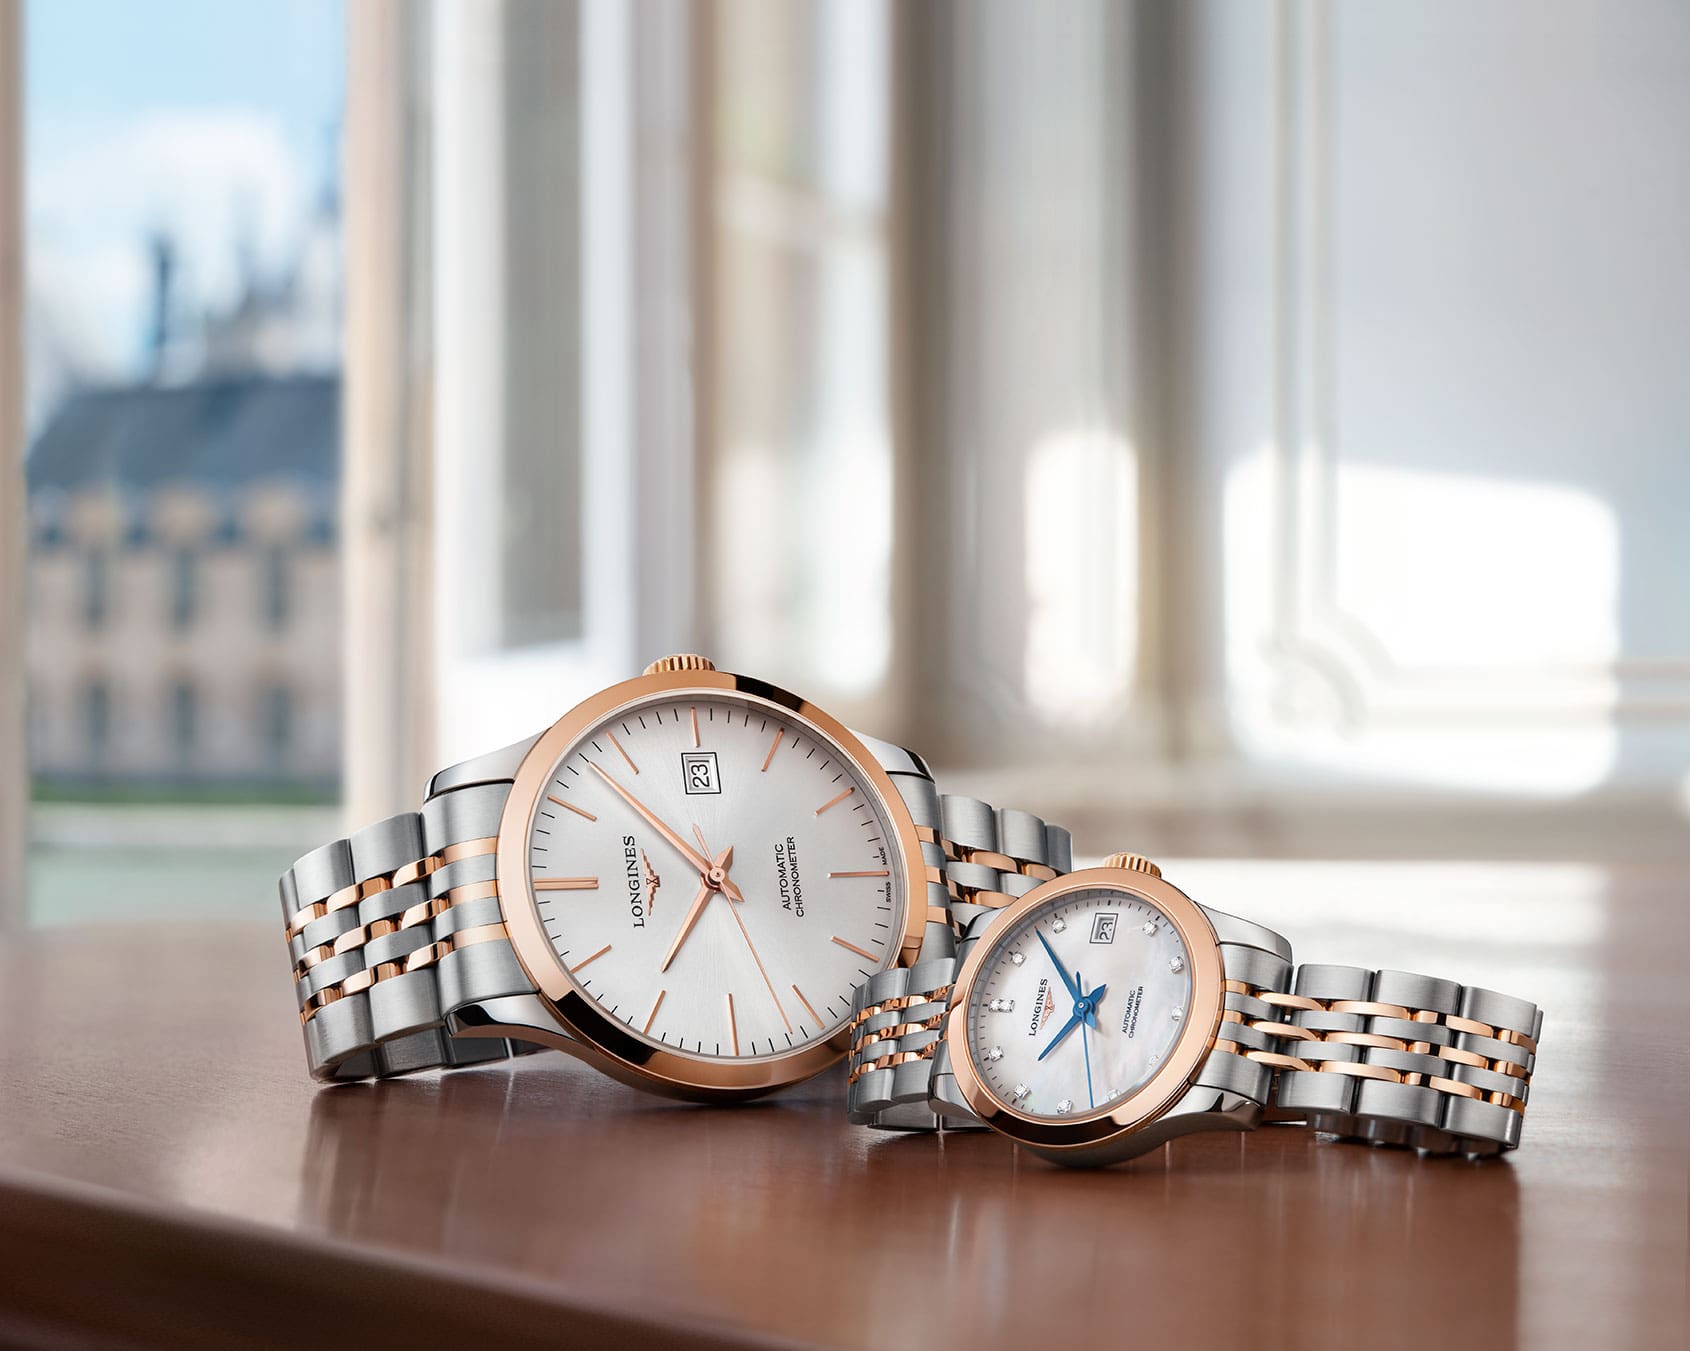 longines gold watches